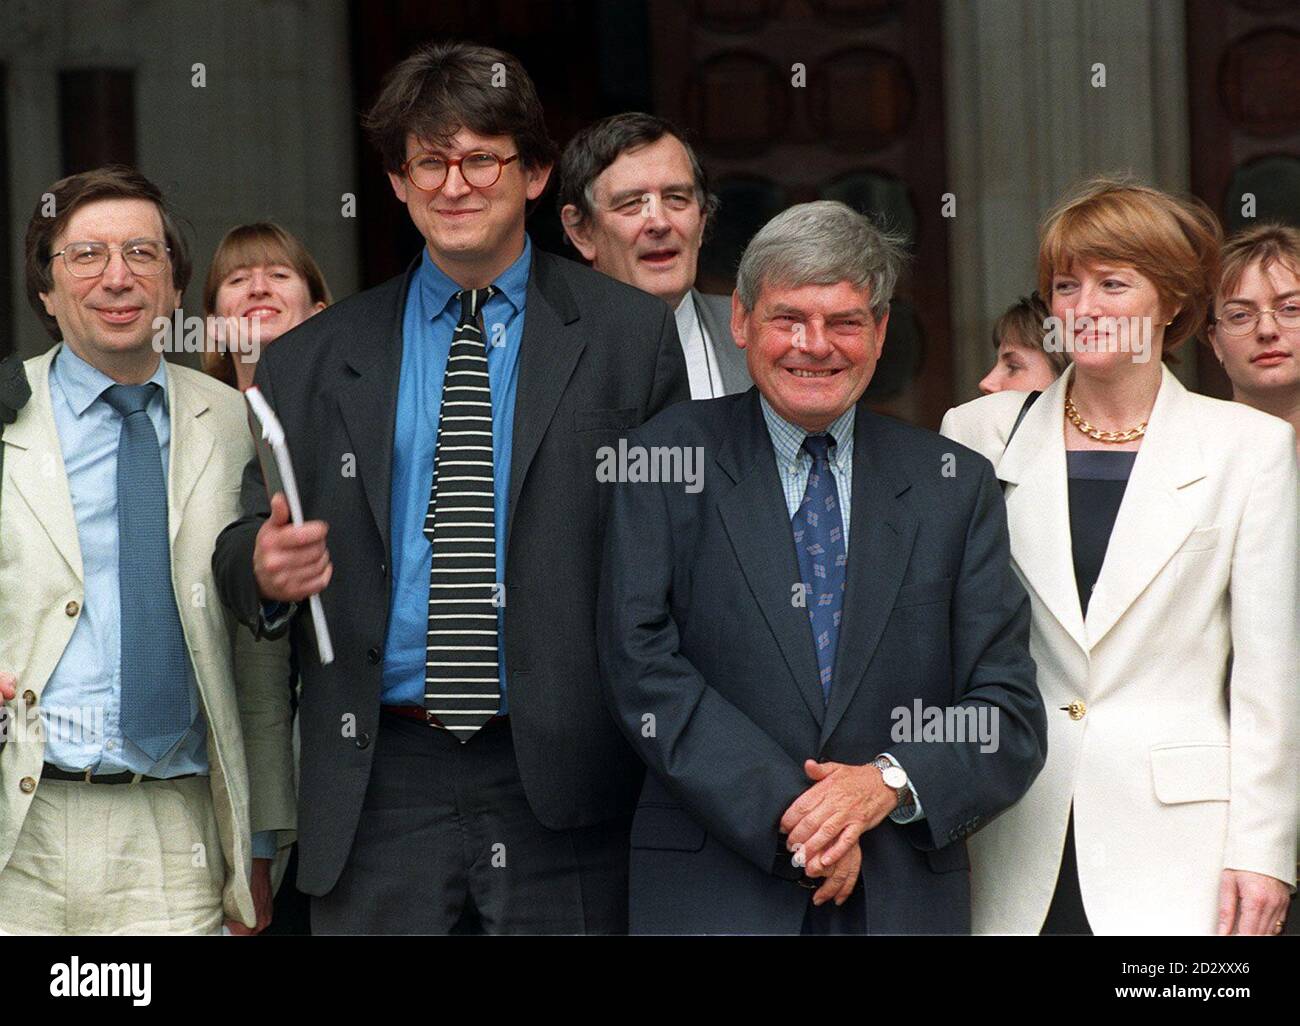 Guardian editor, Alan Rusbridger (2nd from left) and former  editor, Peter Preston, (3rd from left) with their jubliant team outside the High Court in London today (Friday) after Jonathan Aitken's libel action over their allegations in April 1995 that he was financially dependent upon the Saudis collapsed this morning.  Mr Aitken faces public humiliation after making the dramatic decision to discontinue his libel action in the face of last-minute evidence that he had lied to the High Court.  See PA stories under COURTS Aitken.  Photo by Stefan Rousseau/PA. Stock Photo